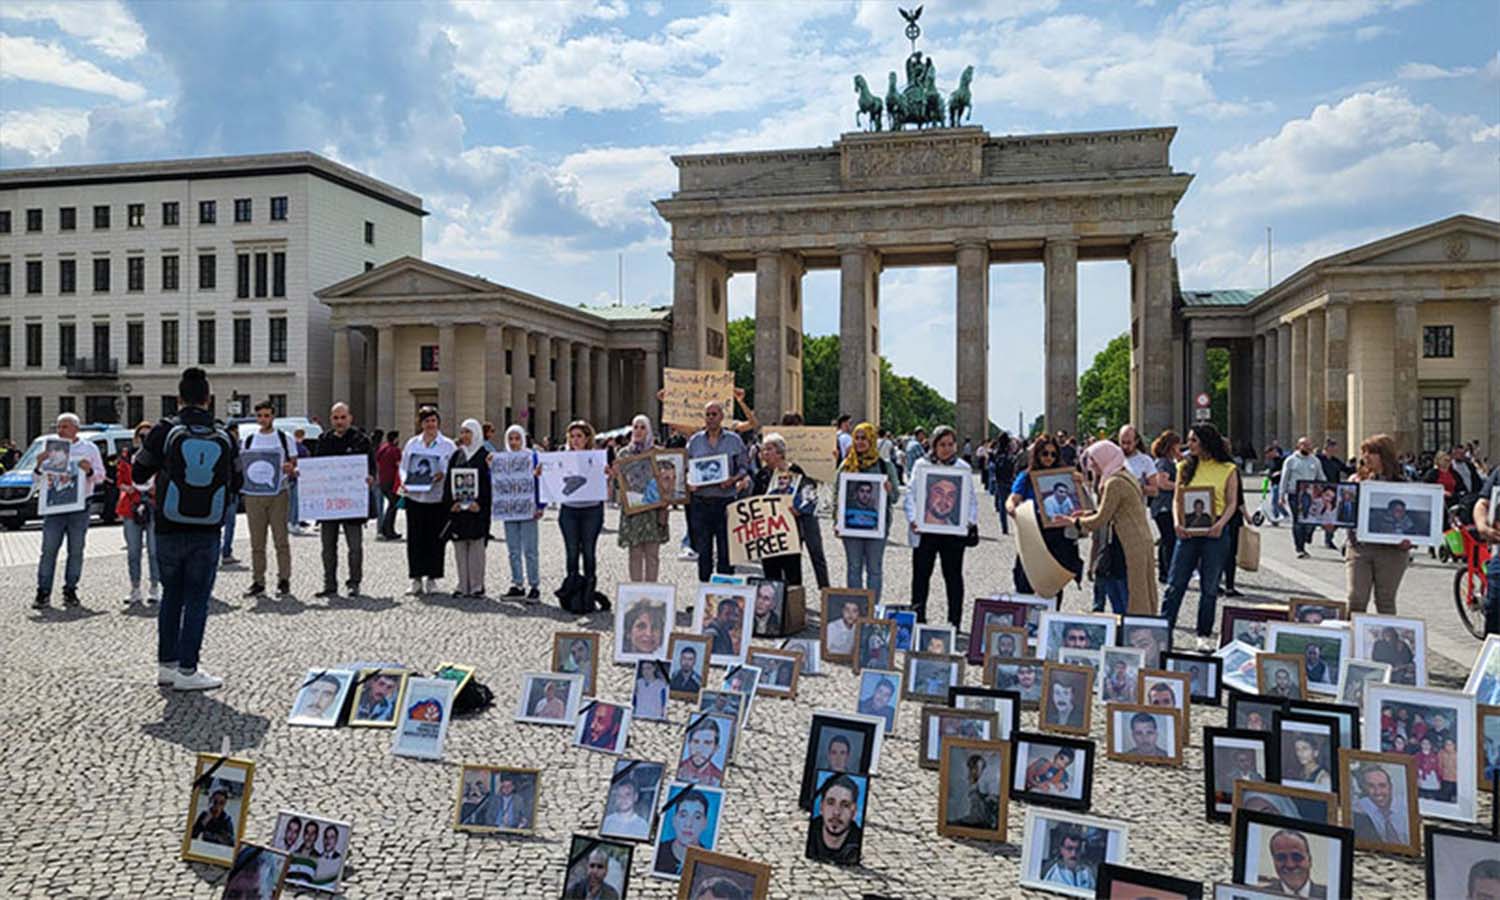 Syrian activists from the Families for Freedom group in Berlin, in solidarity with the families of detainees in Syrian prisons and the missing in Berlin - 7 May 2022 (Families For Freedom)